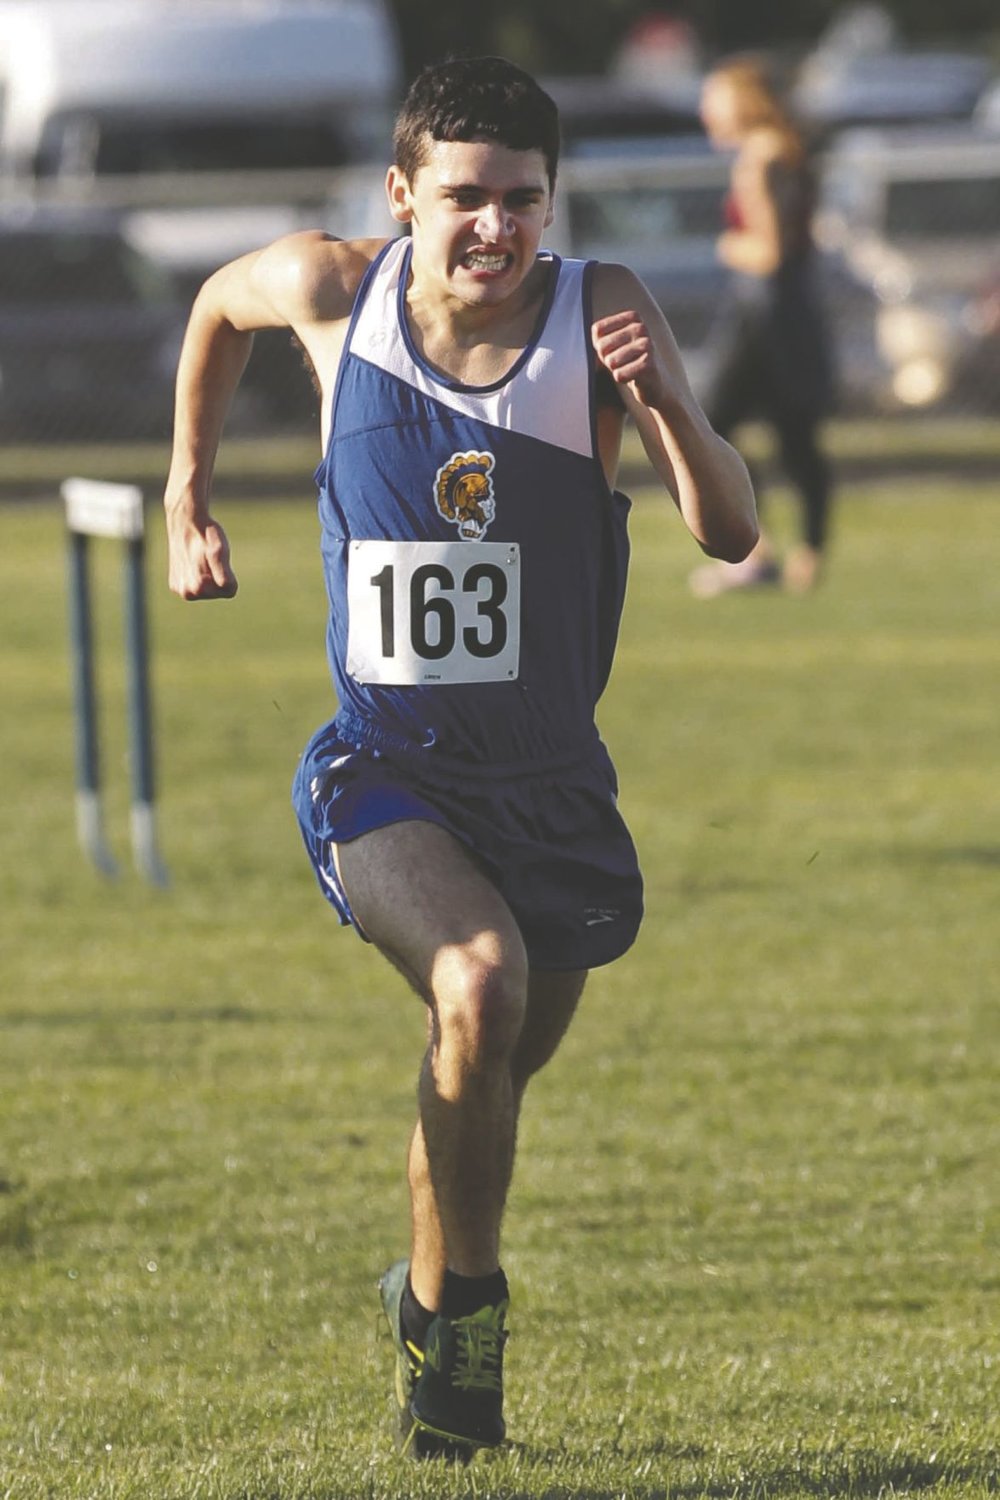 Drake Hayes, the top finisher for Crawfordsville, was second in a time of 16:53.